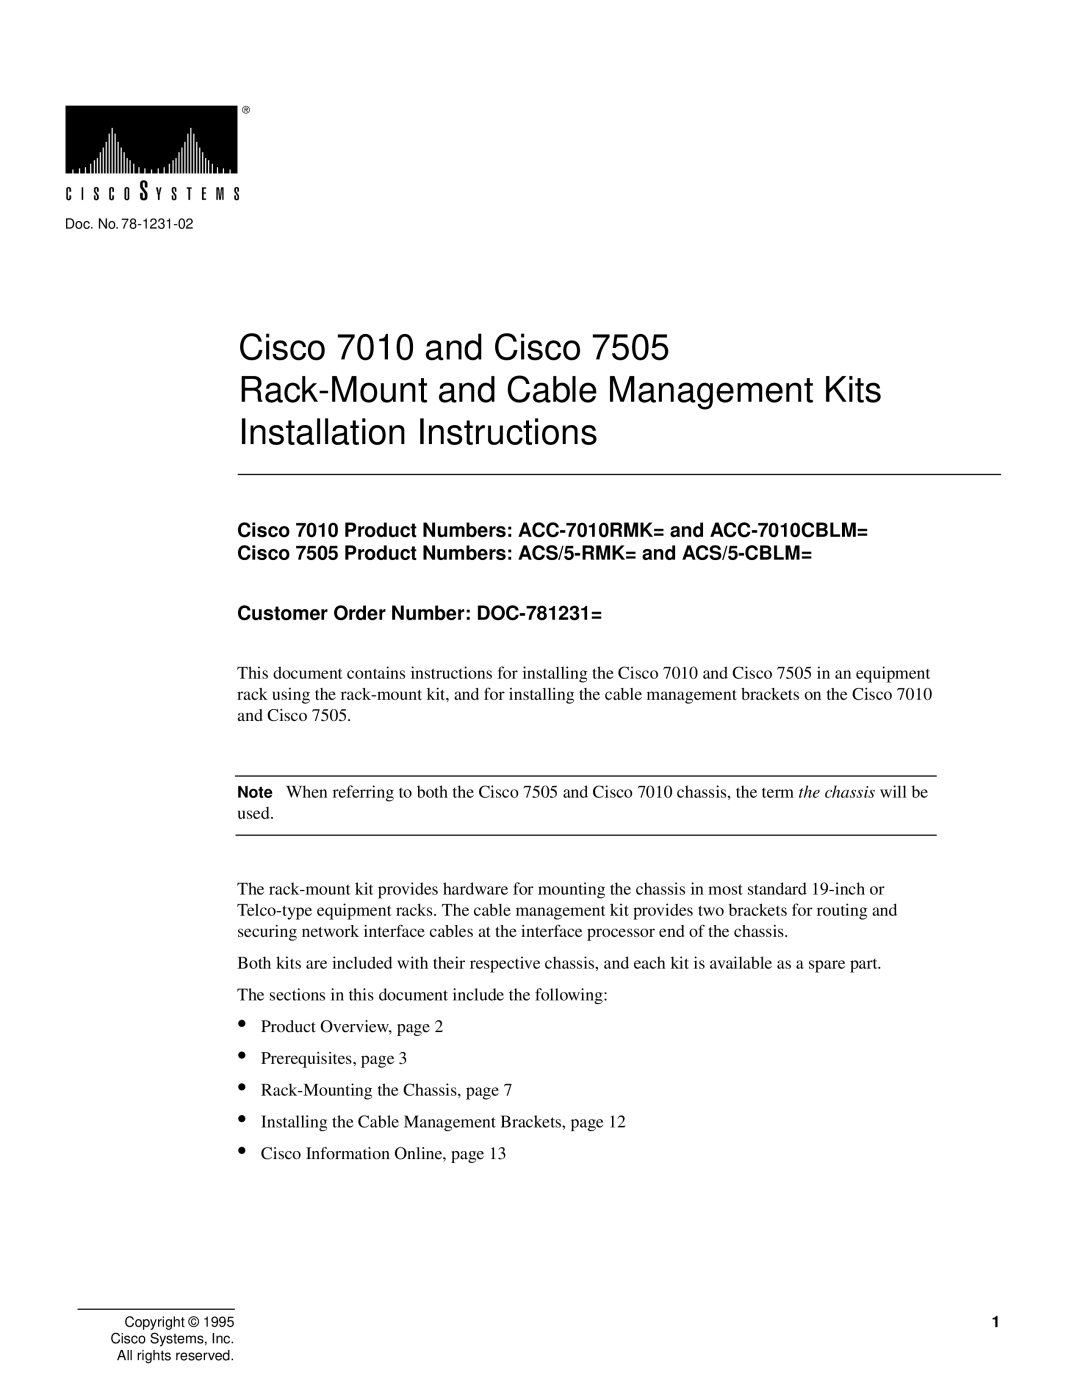 Cisco Systems Cisco 7505/7010 installation instructions Cisco 7010 and Cisco Rack-Mount and Cable Management Kits 